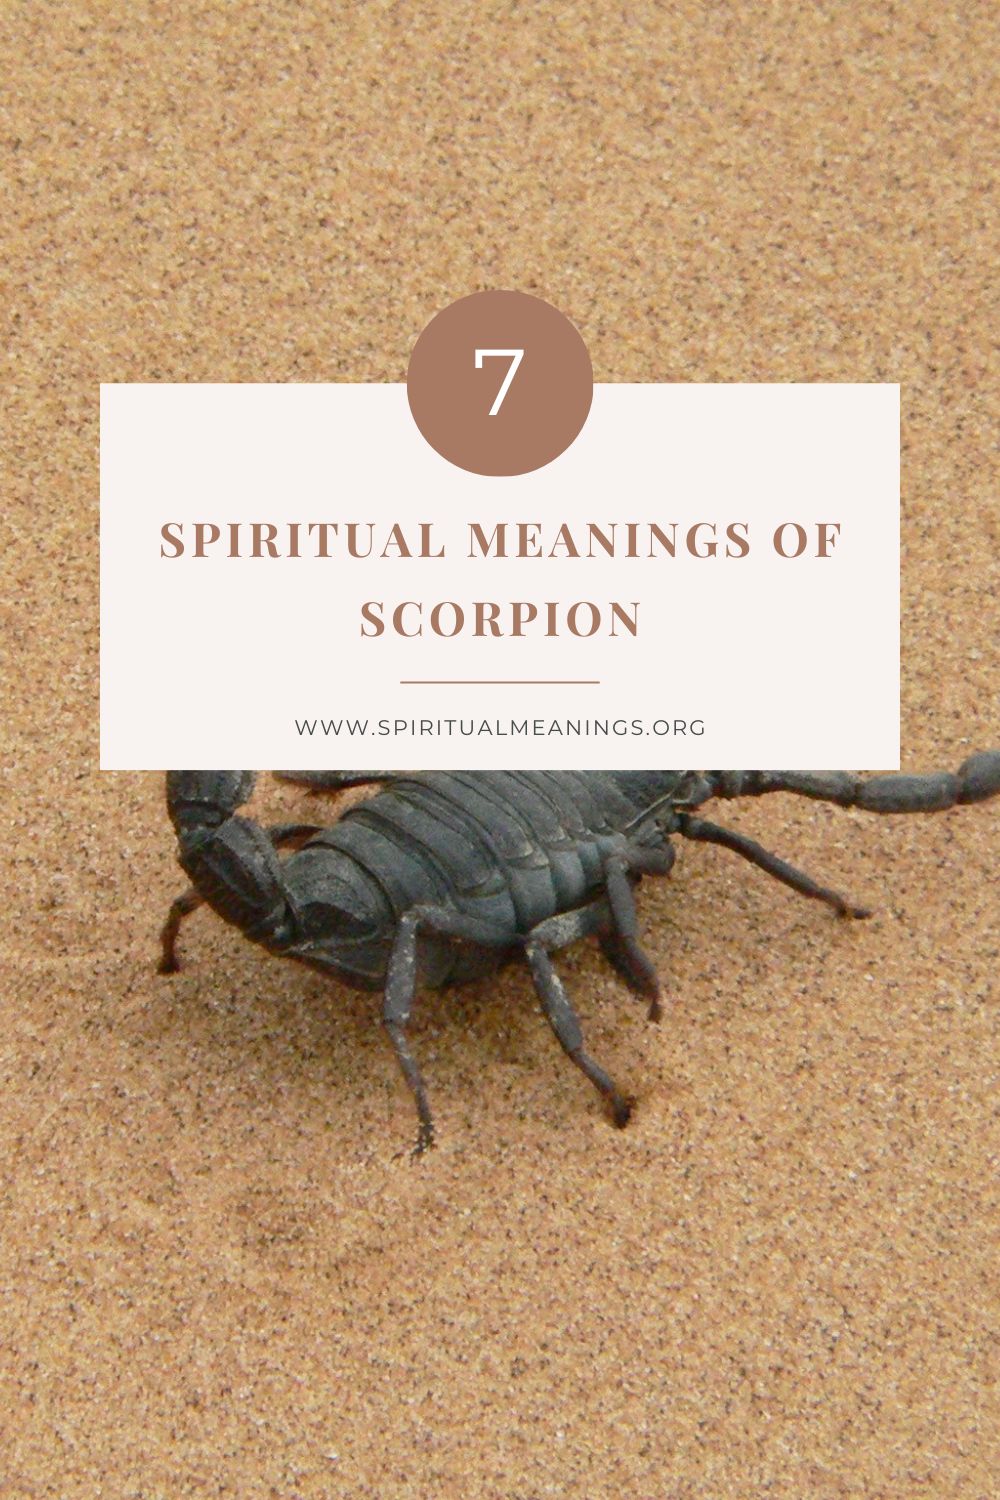 The Varied Symbolism of Scorpions (Spiritual Meanings)